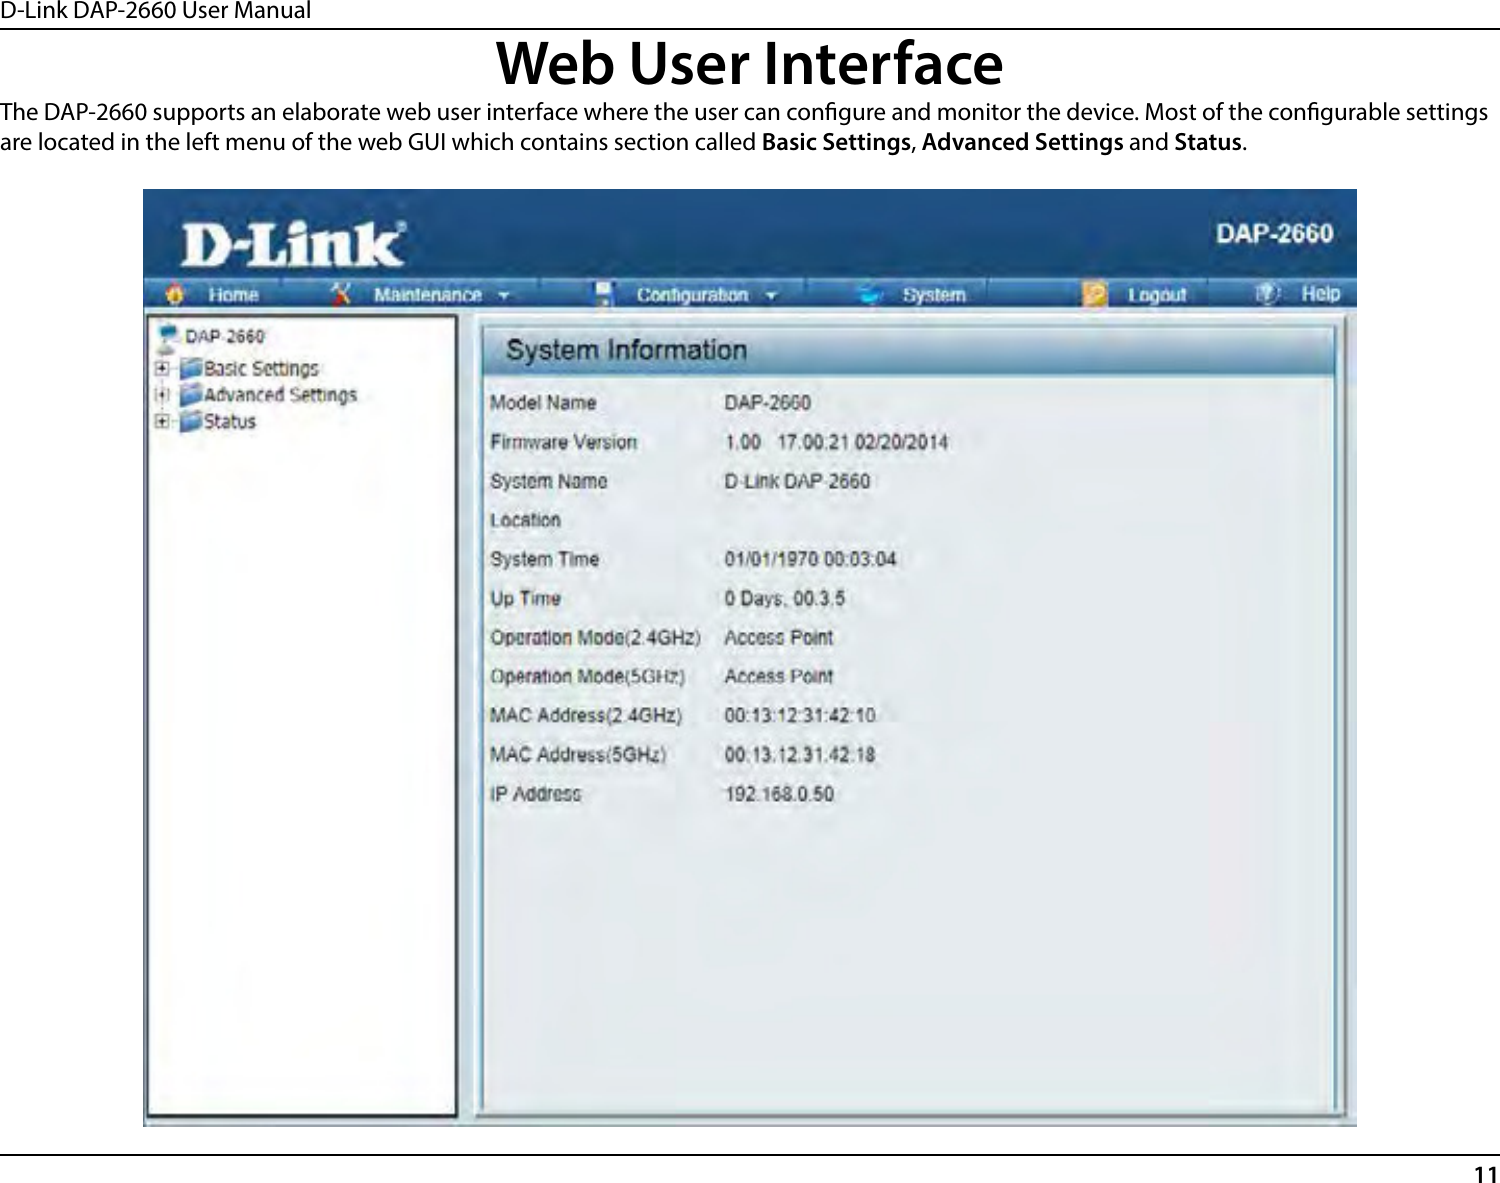 D-Link DAP-2660 User Manual11Web User InterfaceThe DAP-2660 supports an elaborate web user interface where the user can congure and monitor the device. Most of the congurable settings are located in the left menu of the web GUI which contains section called Basic Settings, Advanced Settings and Status.